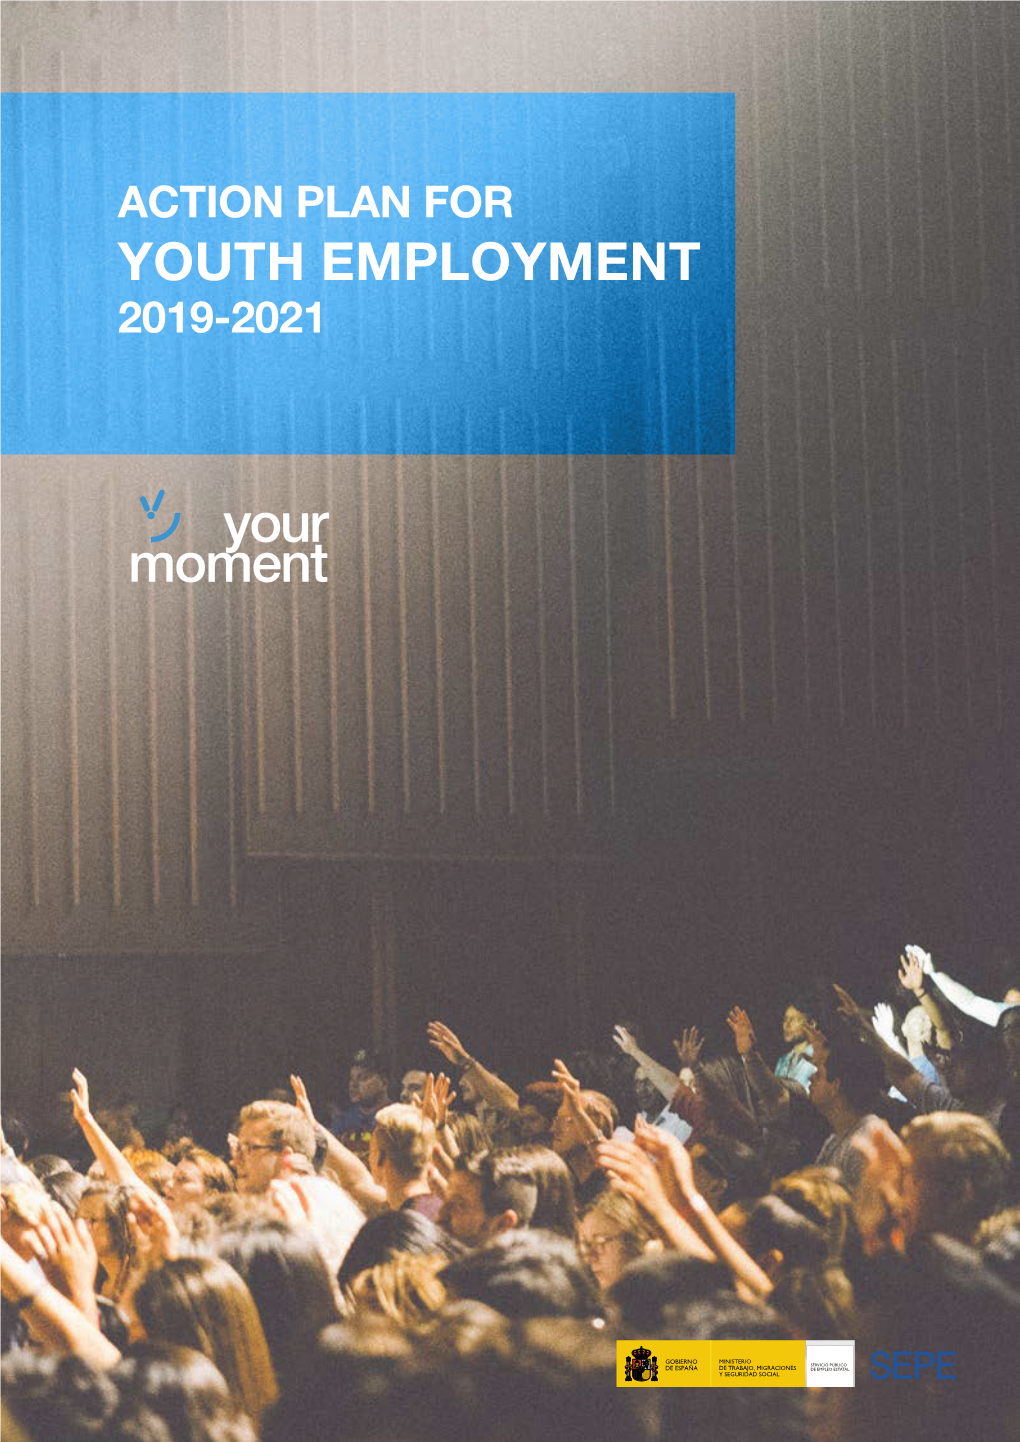 Action Plan for Youth Employment 2019-2021